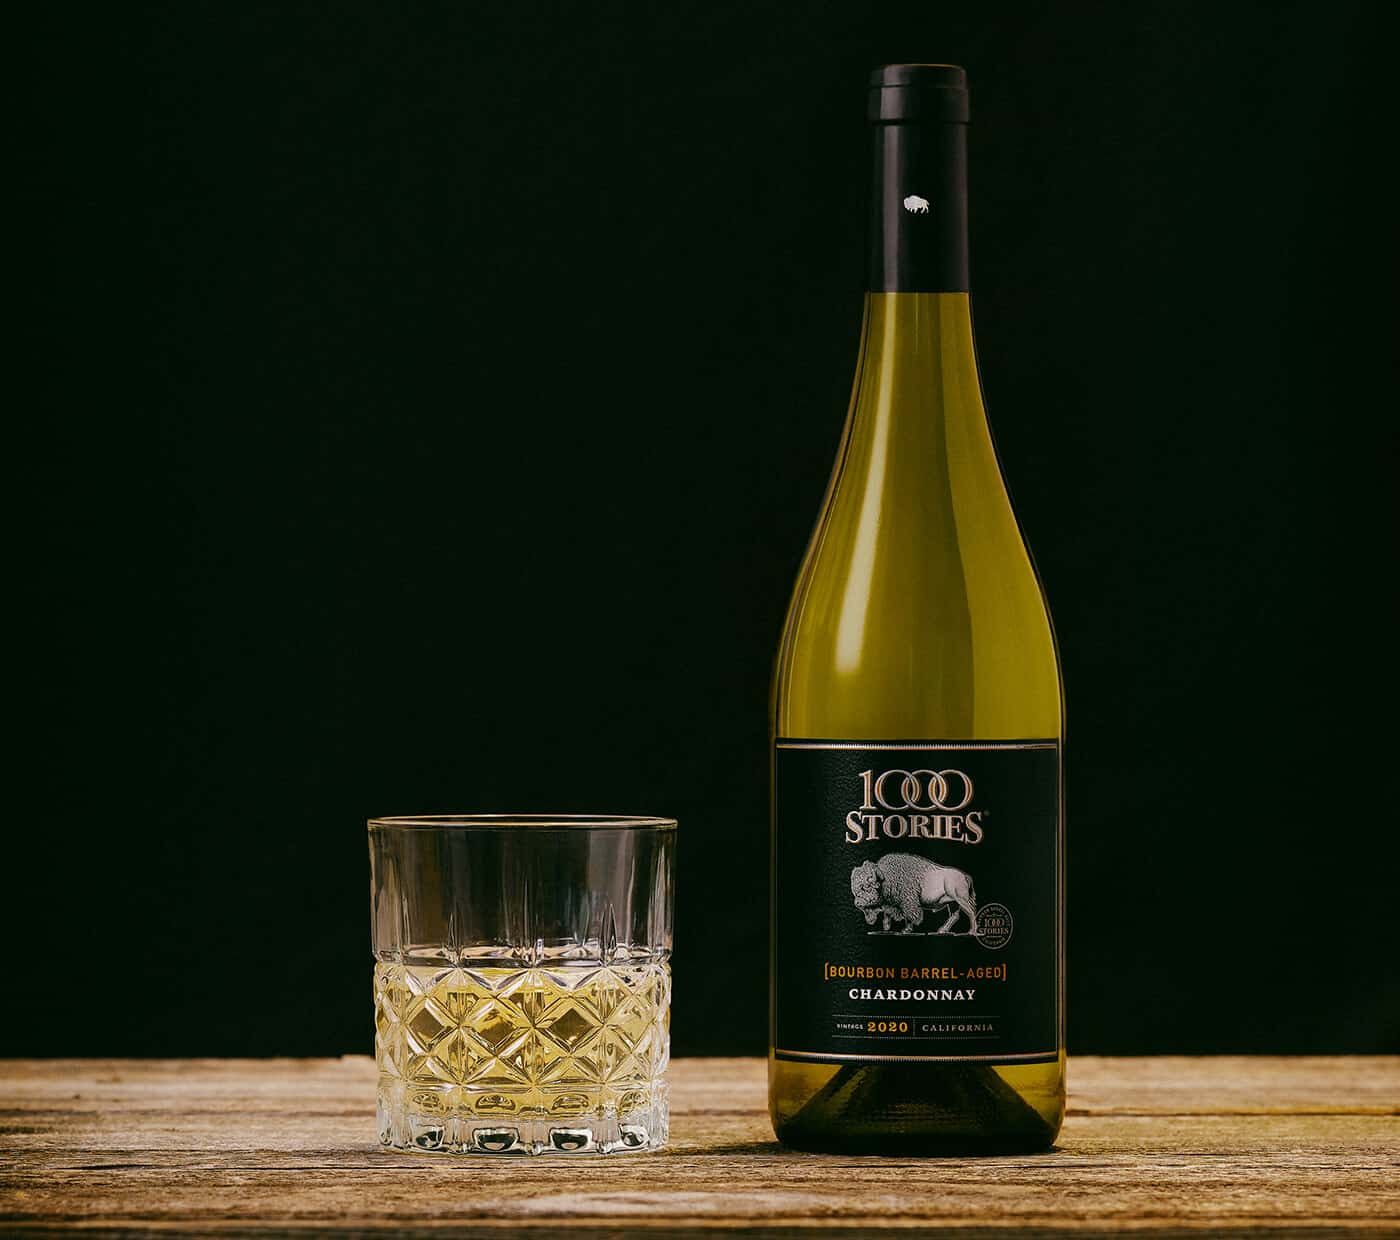 A glass of white wine sits next to a bottle of 1000 Stories 2020 Chardonnay